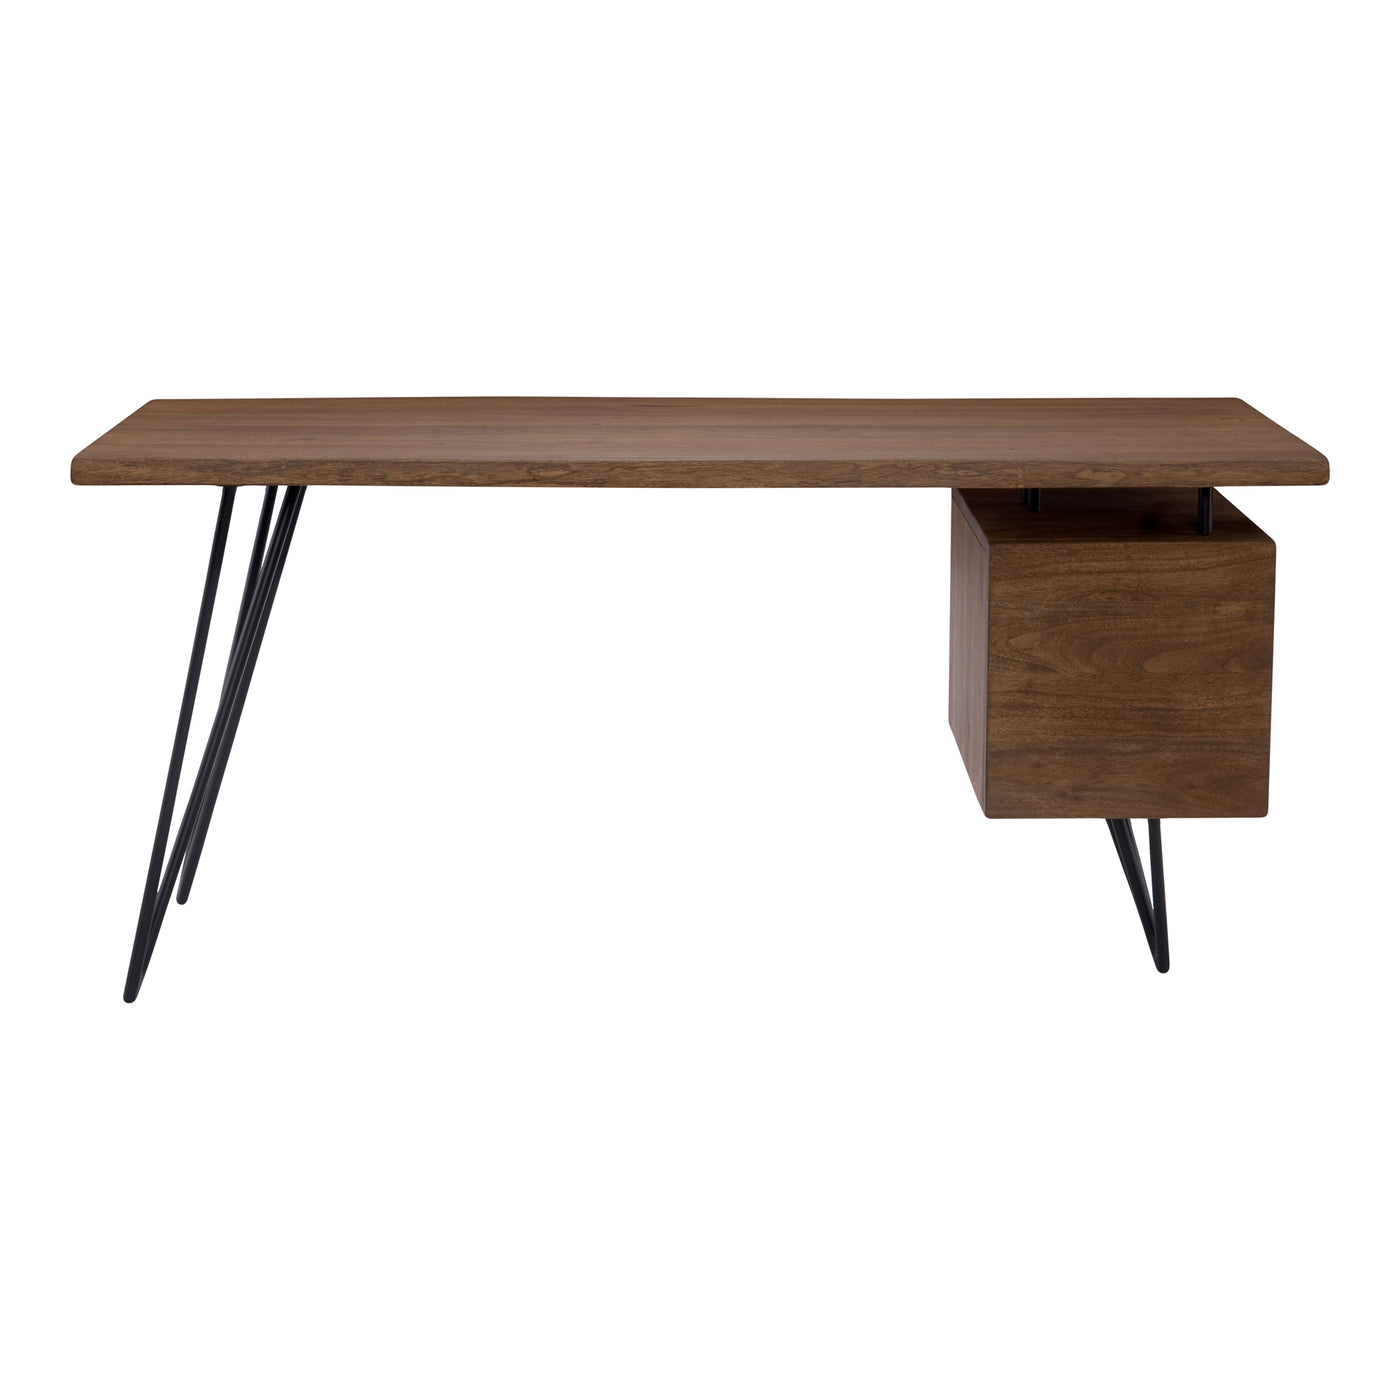 The live edge of high-quality acacia wood makes the Nailed Desk a beautiful addition to your office design plan. Its large...